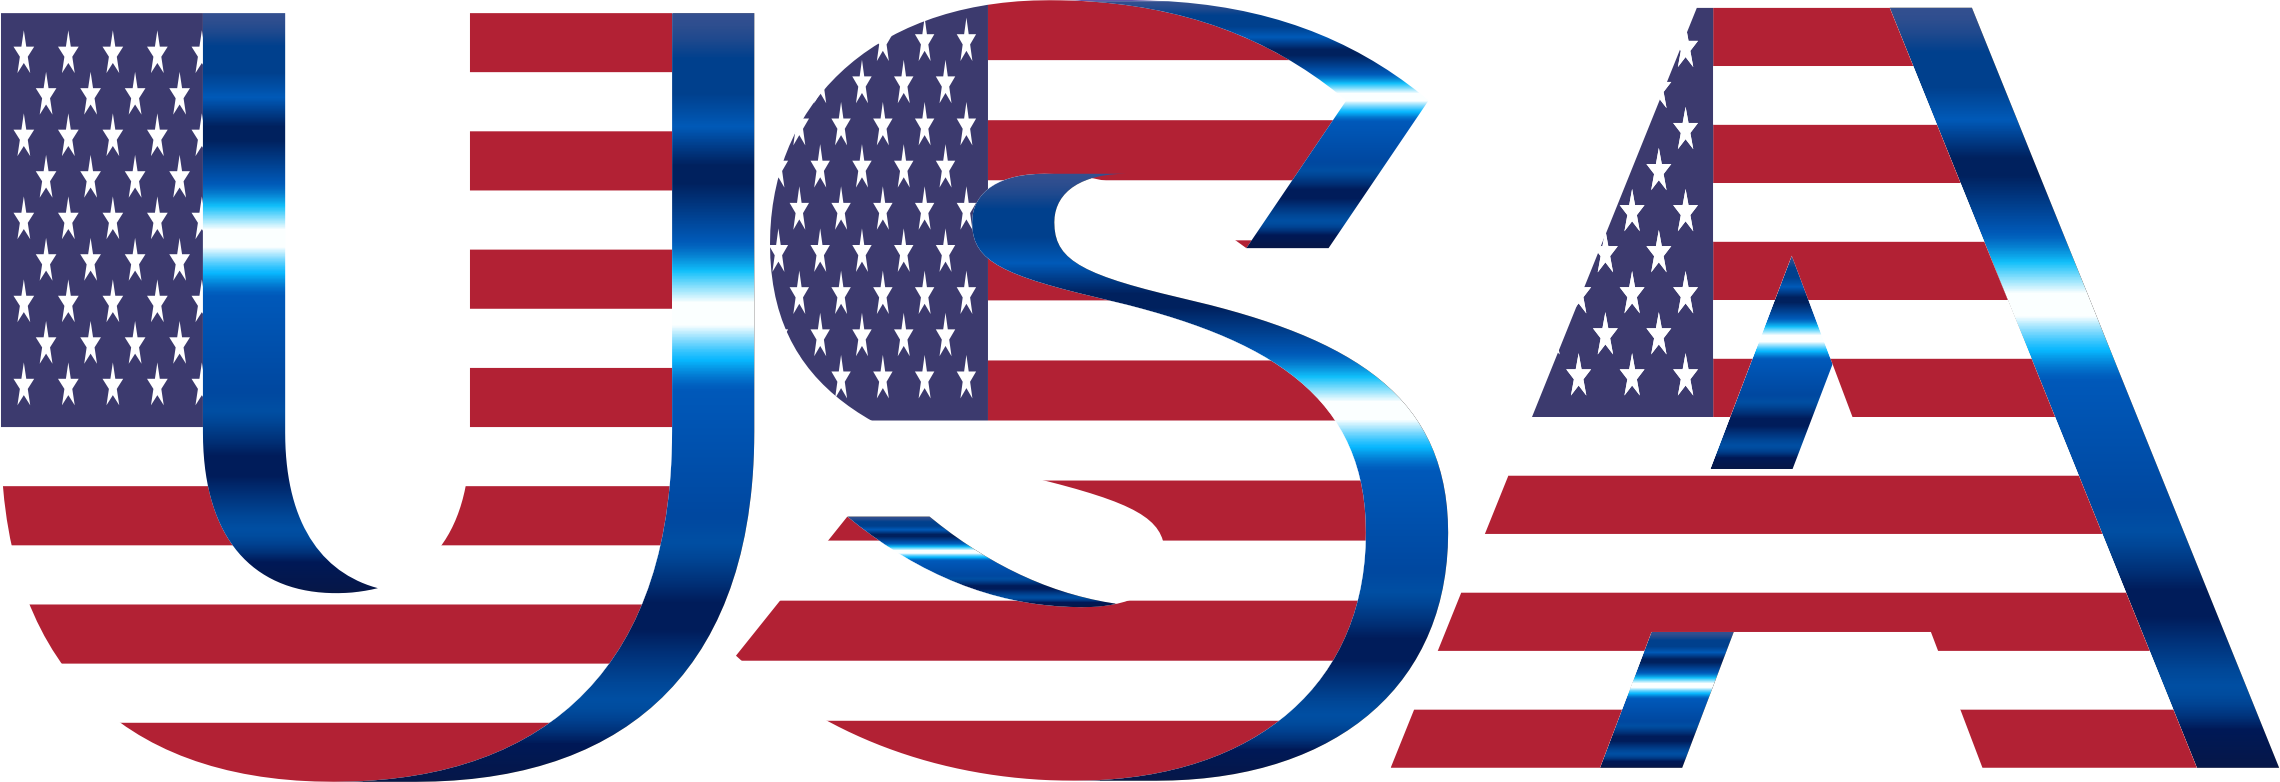 Freedom clipart us flag. Usa typography no filters